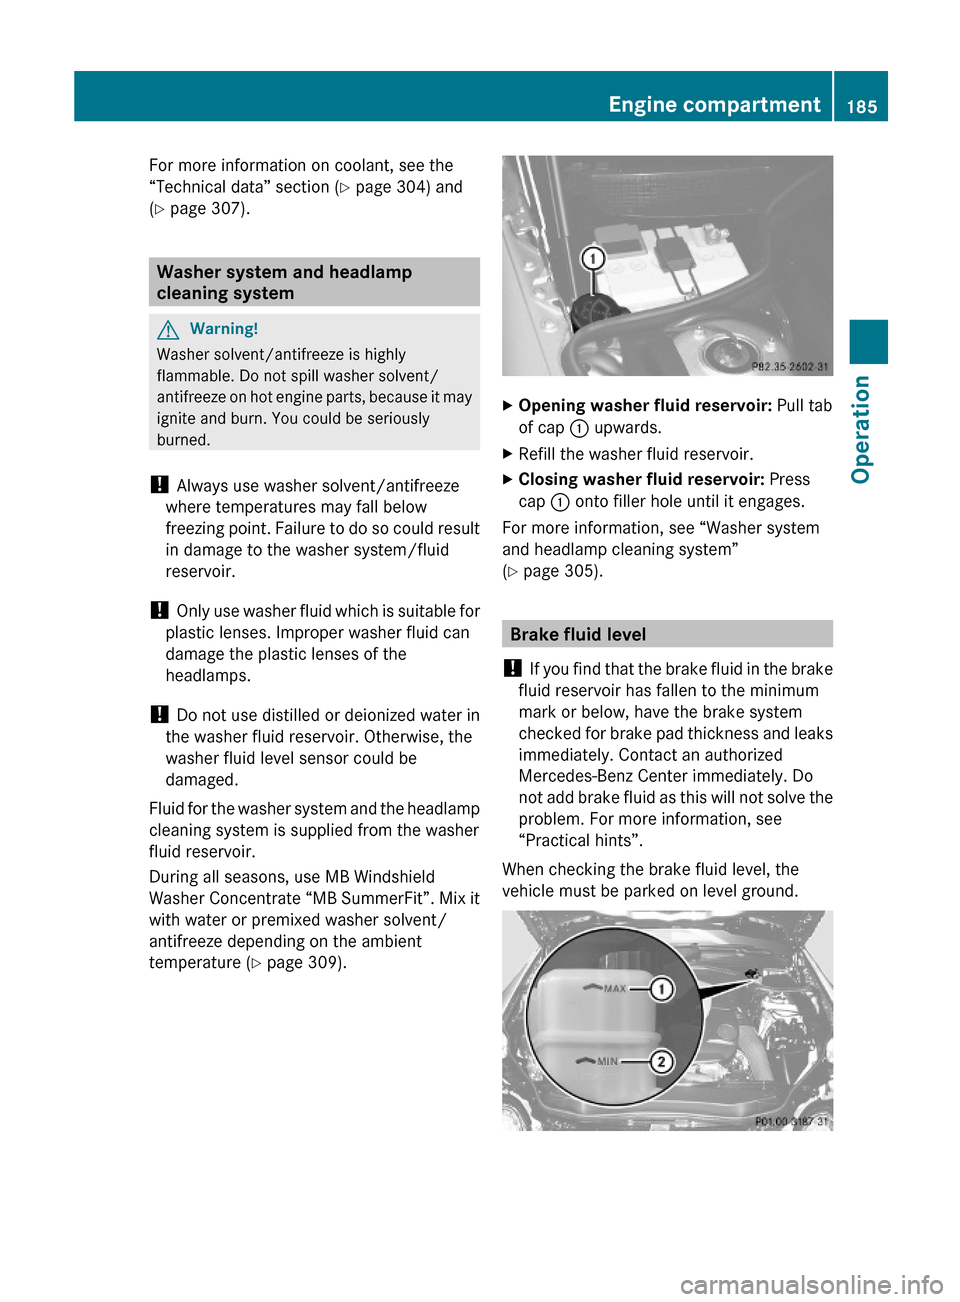 MERCEDES-BENZ SL500 2011 R230 Owners Manual For more information on coolant, see the
“Technical data” section (Y page 304) and
(Y page 307).
Washer system and headlamp 
cleaning system
GWarning!
Washer solvent/antifreeze is highly
flammable